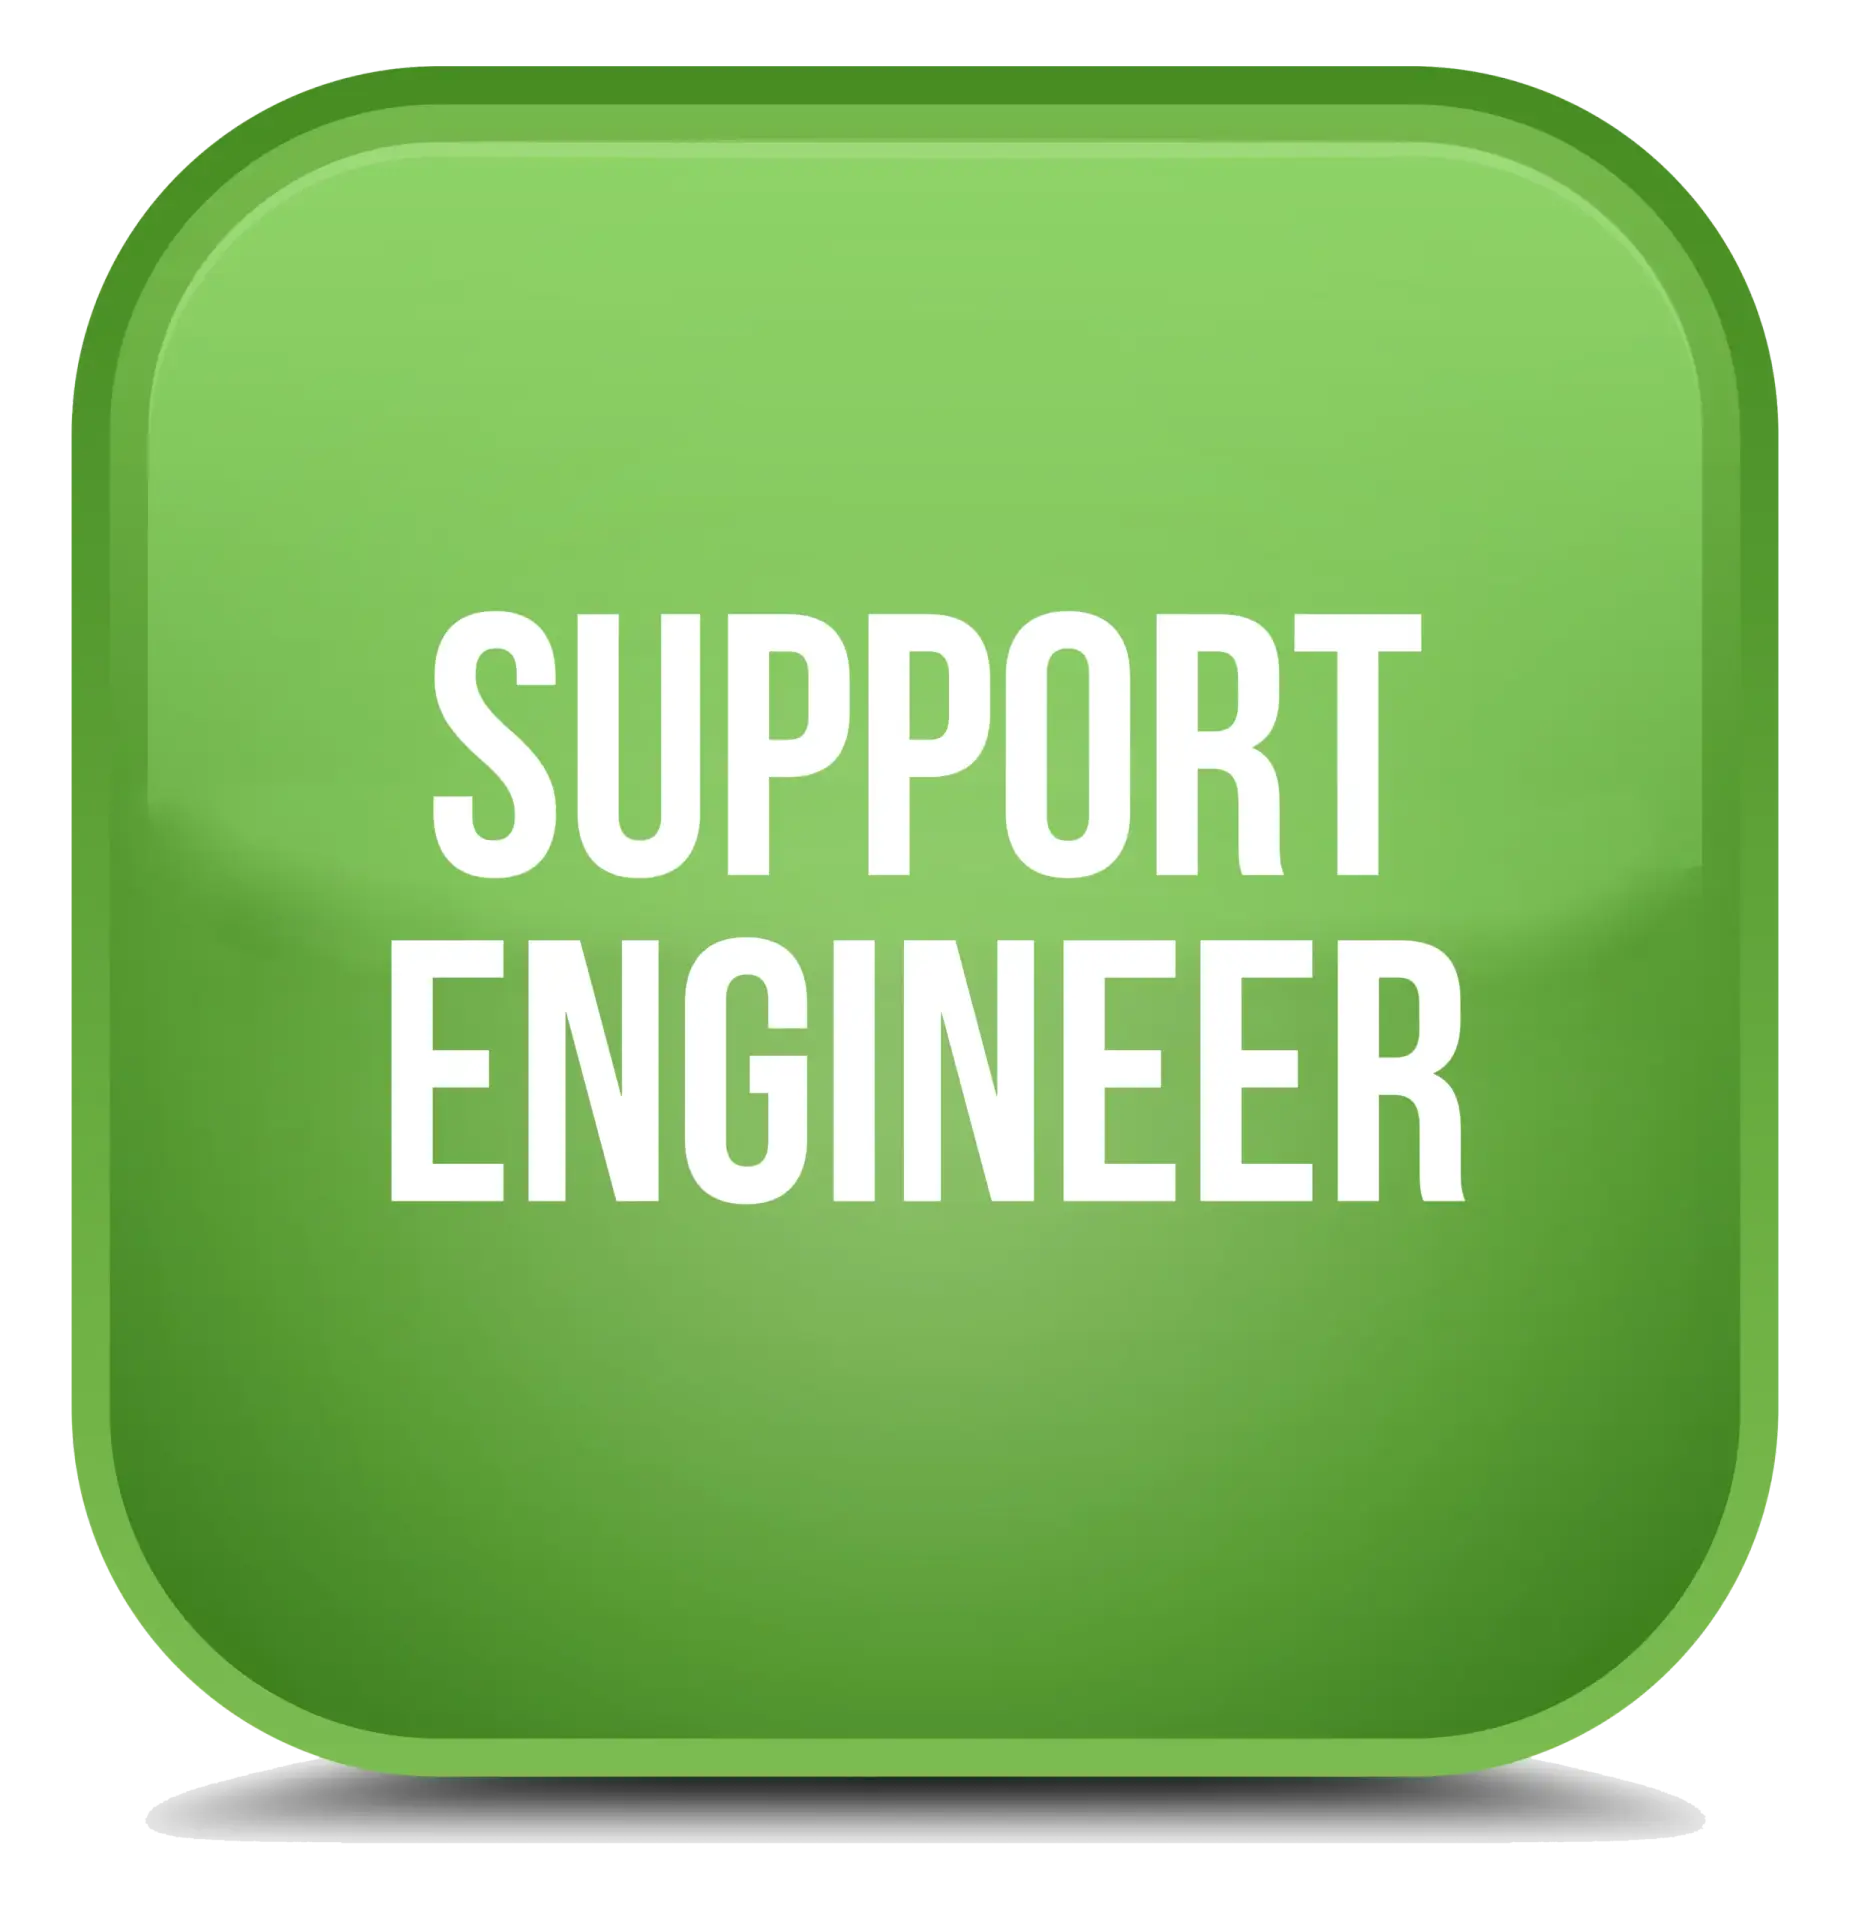 green button with white letters Support Engineer indicating IT Enabled is hiring for Support Engineers